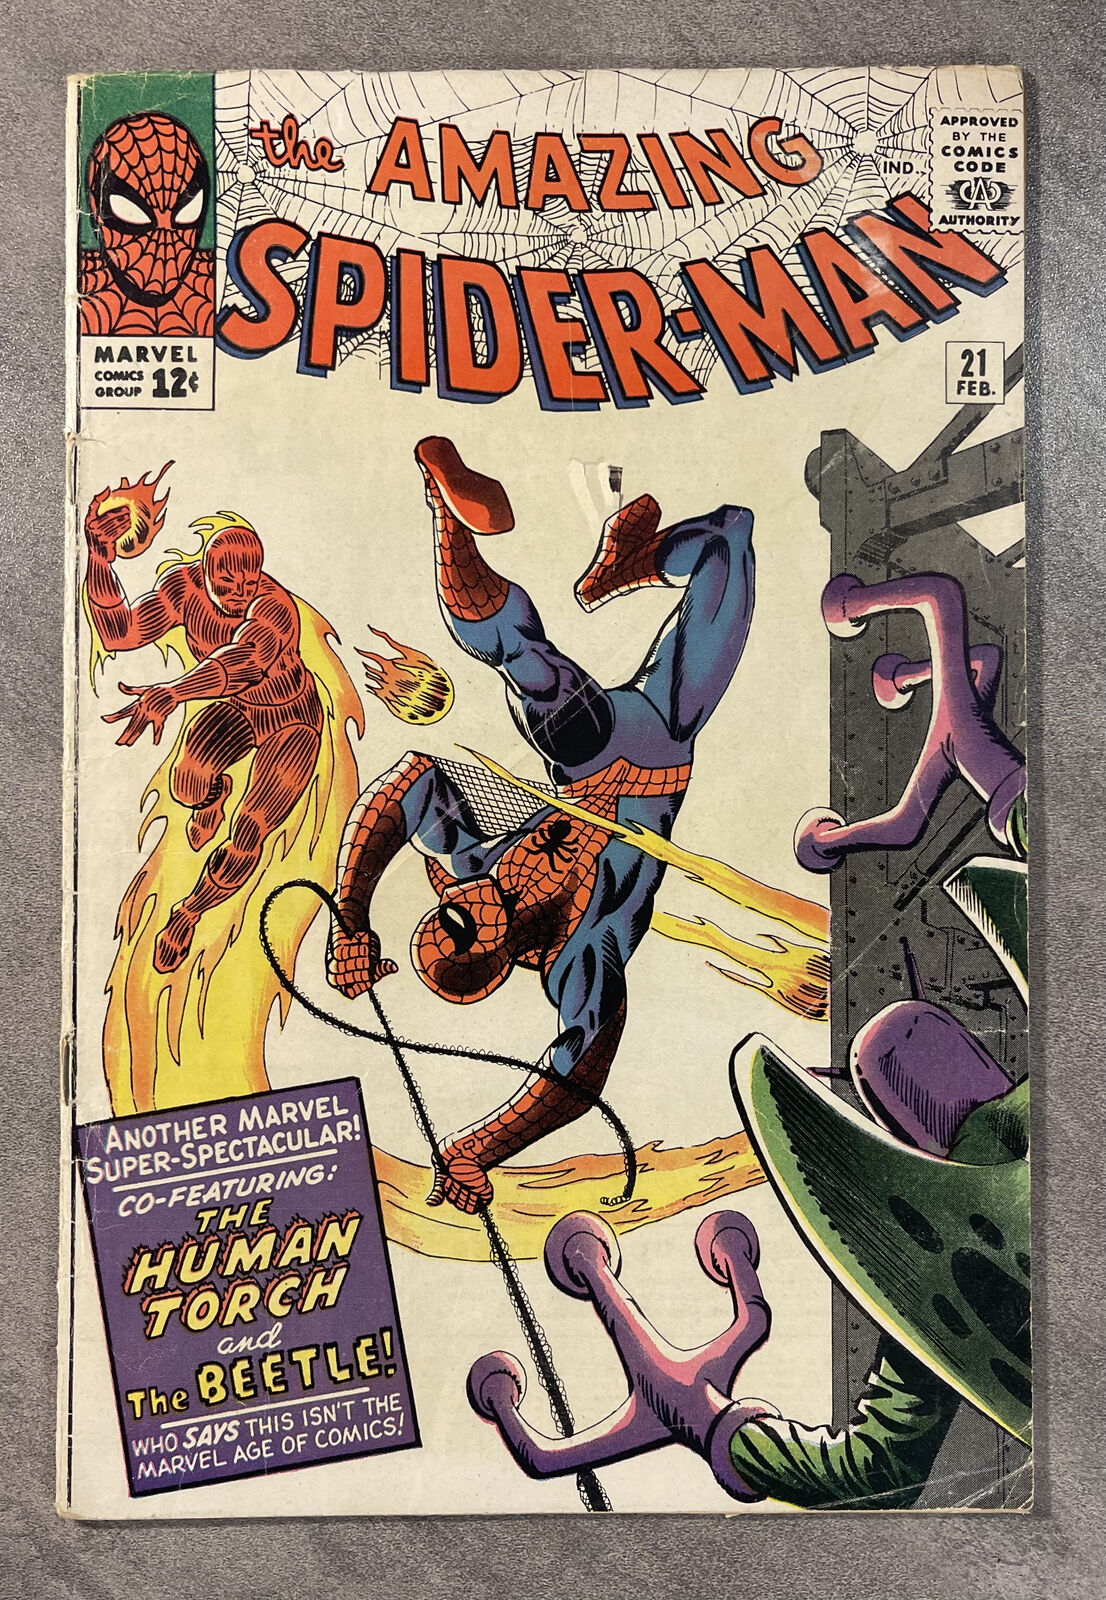 THE AMAZING SPIDER-MAN #21 FEB 1965 - THE BEETLE HUMAN TORCH SILVER AGE GEM-G+